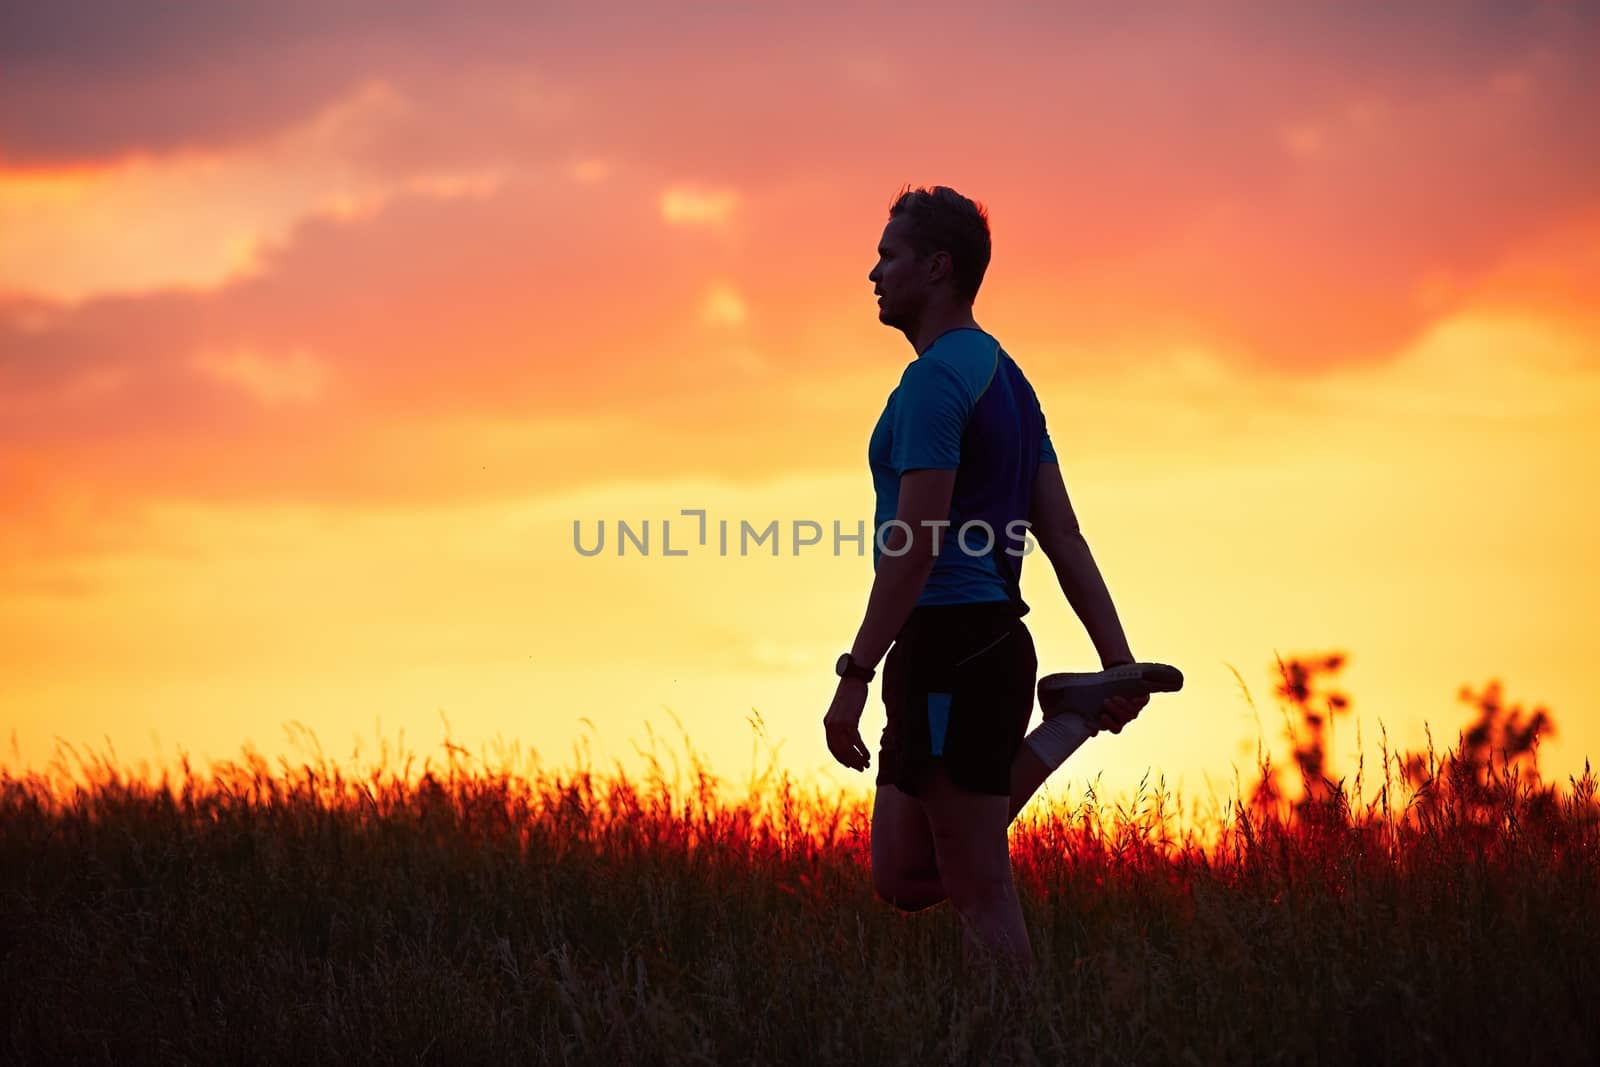 Silhouette of runner. Outdoor cross-country running. Male runner is doing stretching exercise and preparing for workout during golden sunset.